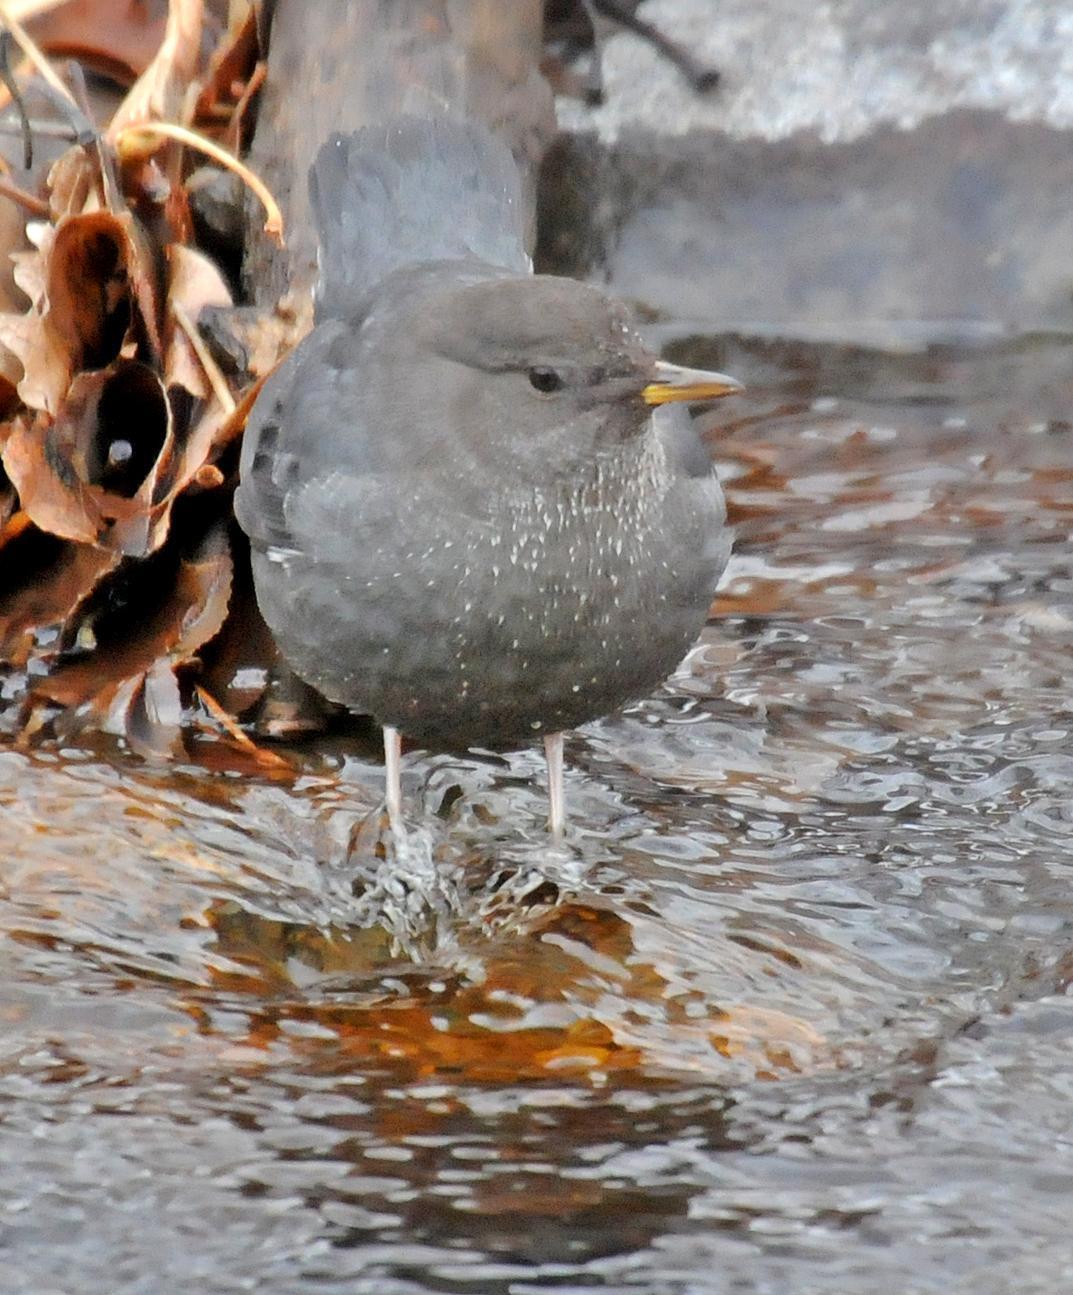 American Dipper (Northern) Photo by Steven Mlodinow